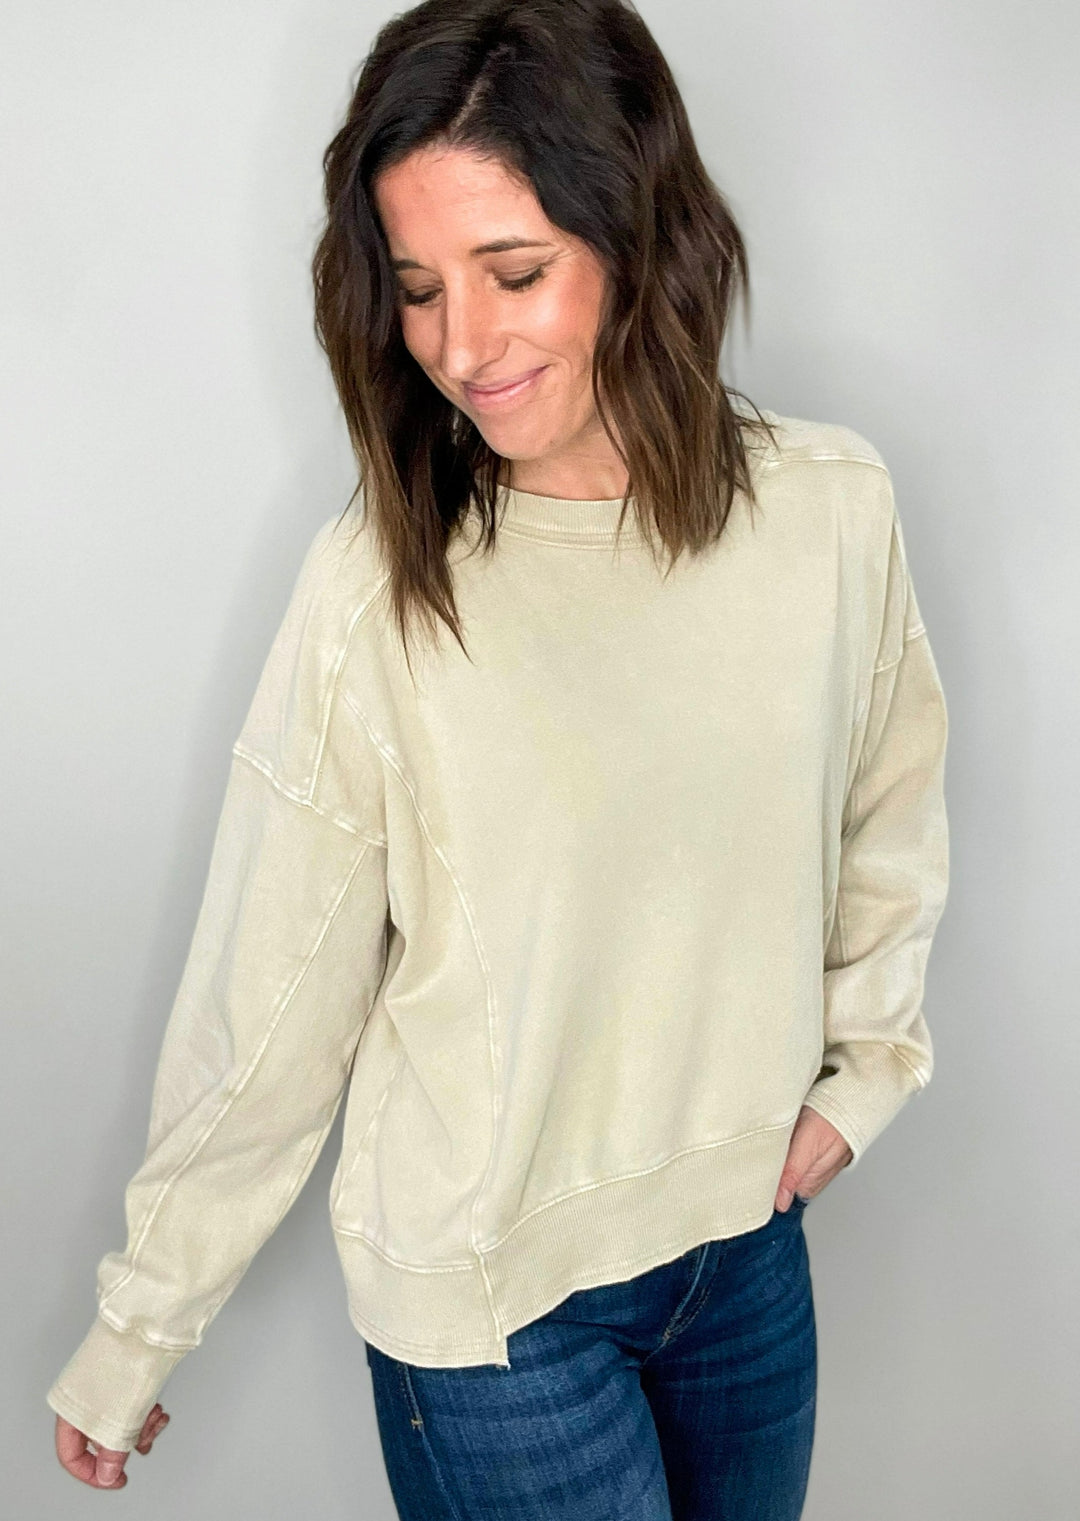 Mineral Washed Light Khaki Pullover | Neutral Women's Cozy Pullover Sweatshirt 